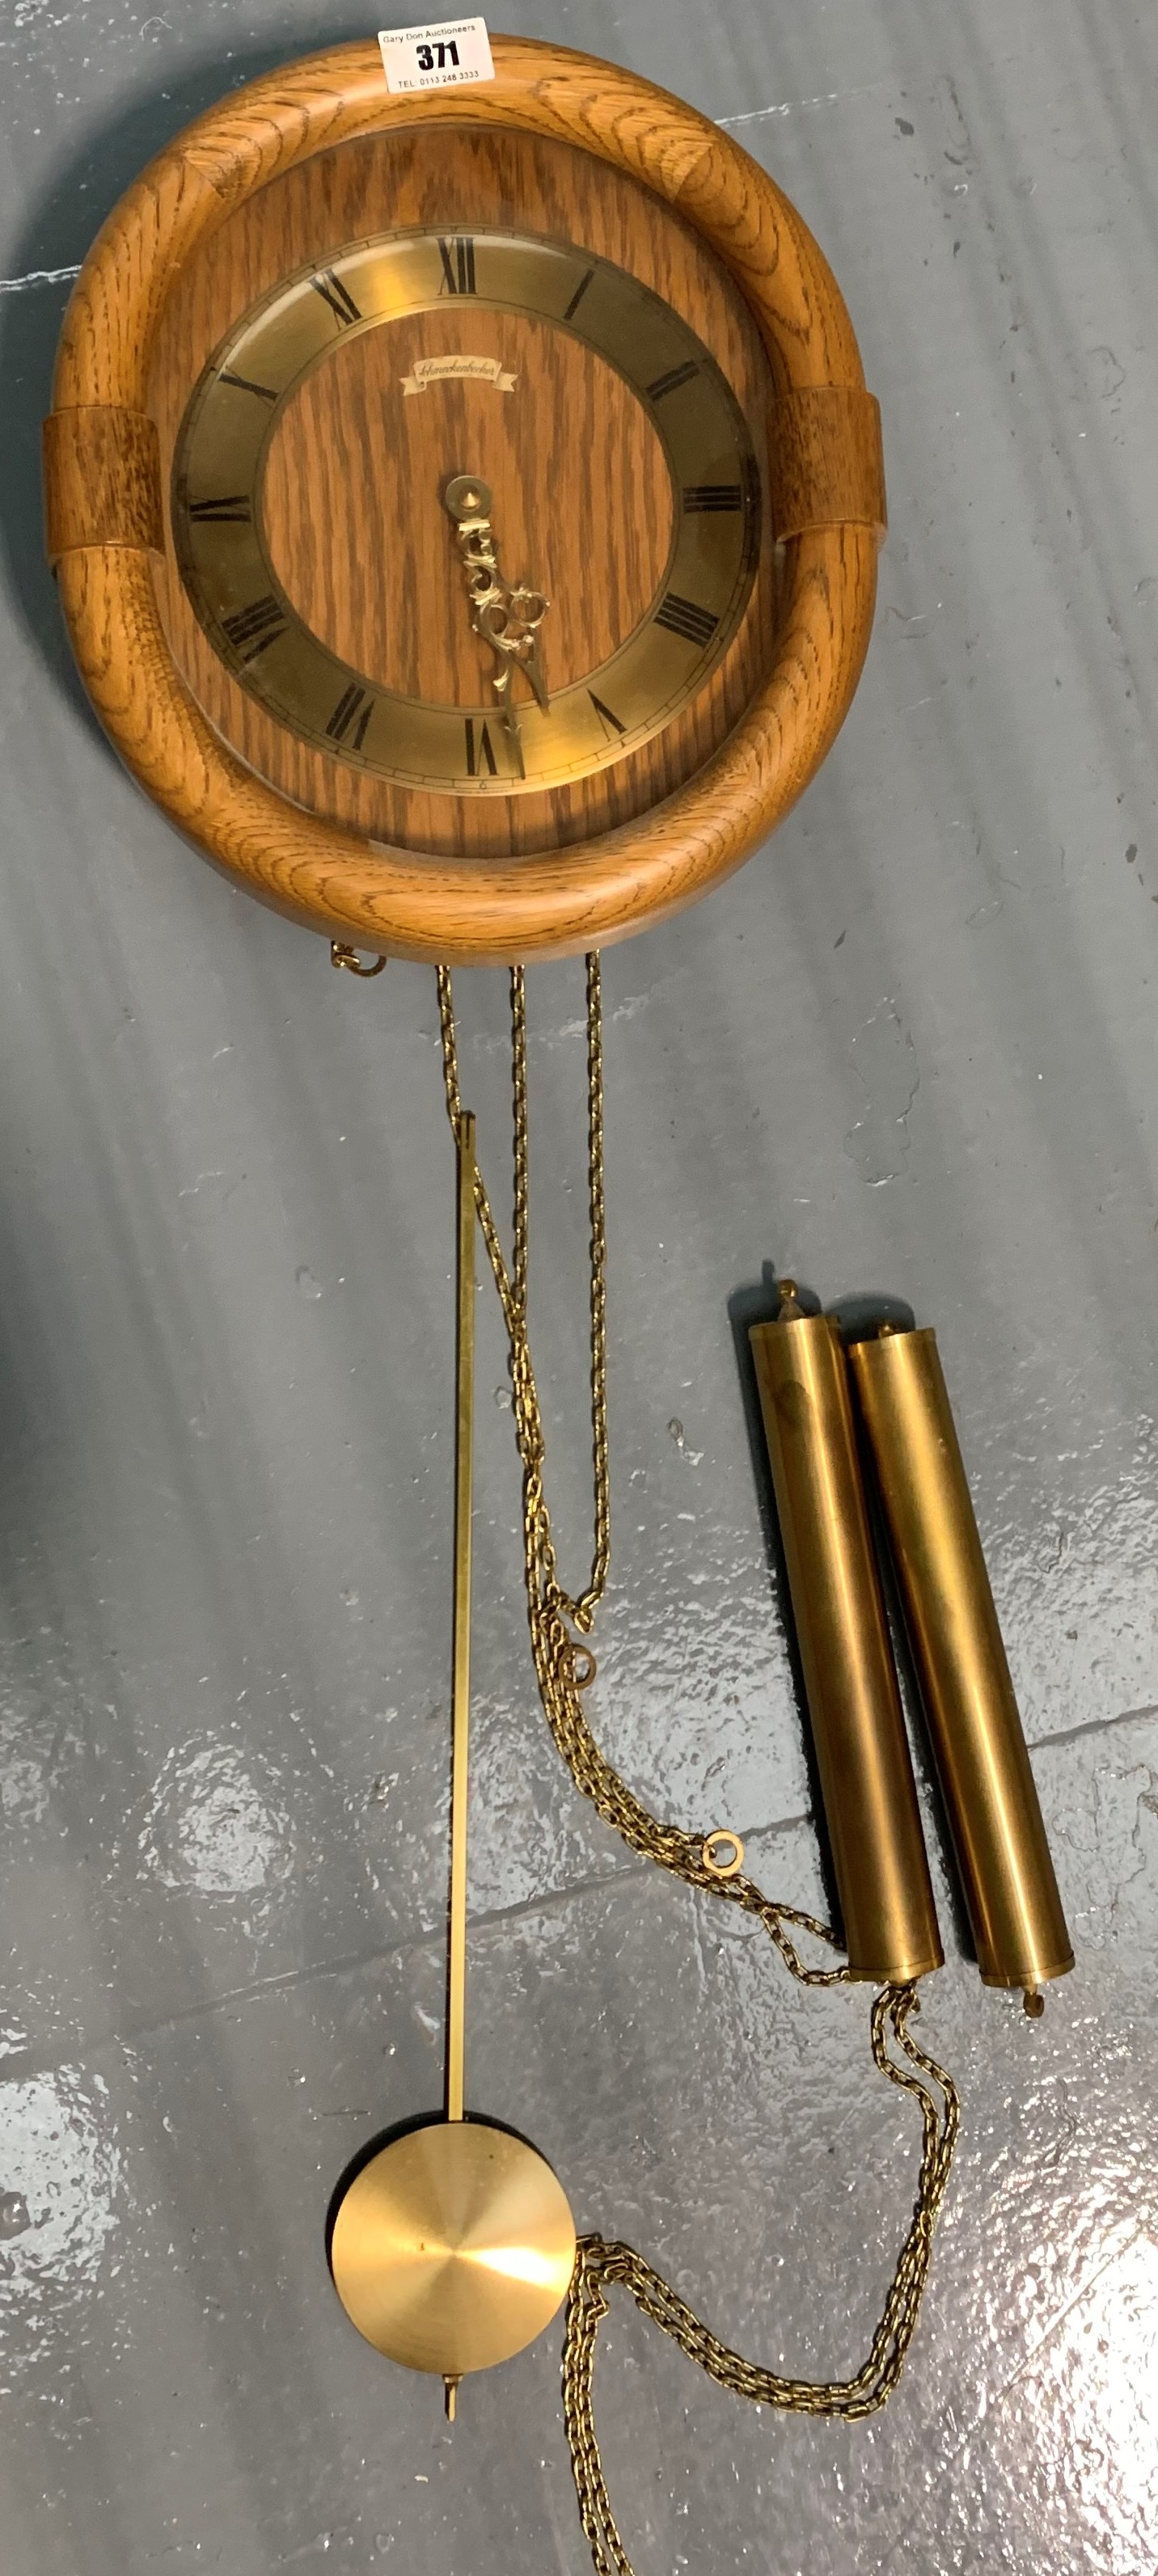 Modern German wall clock with pendulum and 2 weights - Image 2 of 3